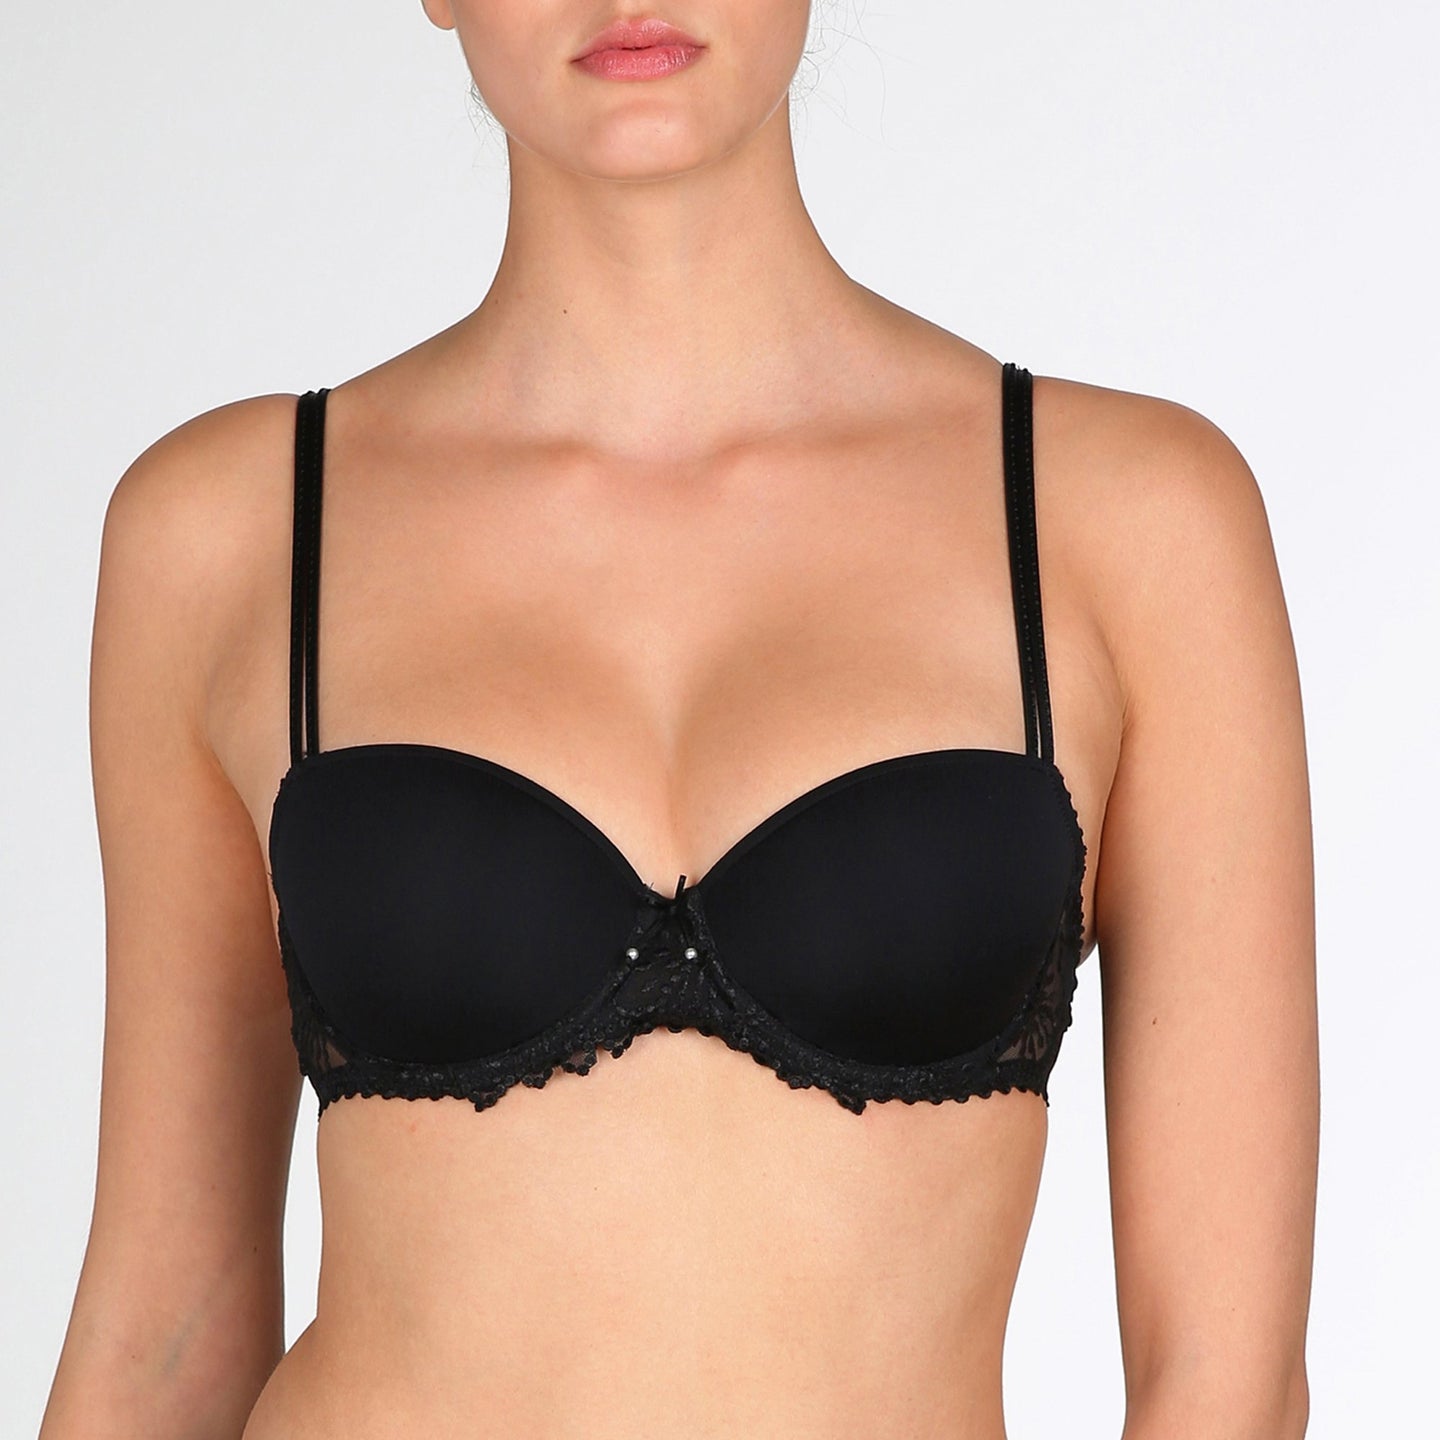 Jane formed and seamless cupped bra with the seductive balconnet neckline. Smooth opaque cups with floral lace trim. The wider wire ensures optimal comfort. Lifts the bust, creating a natural image. Perfect for multiple necklines. B to F cup. Fabric content: Polyamide: 66%, Polyester: 26%, Elastane: 8%. Black.